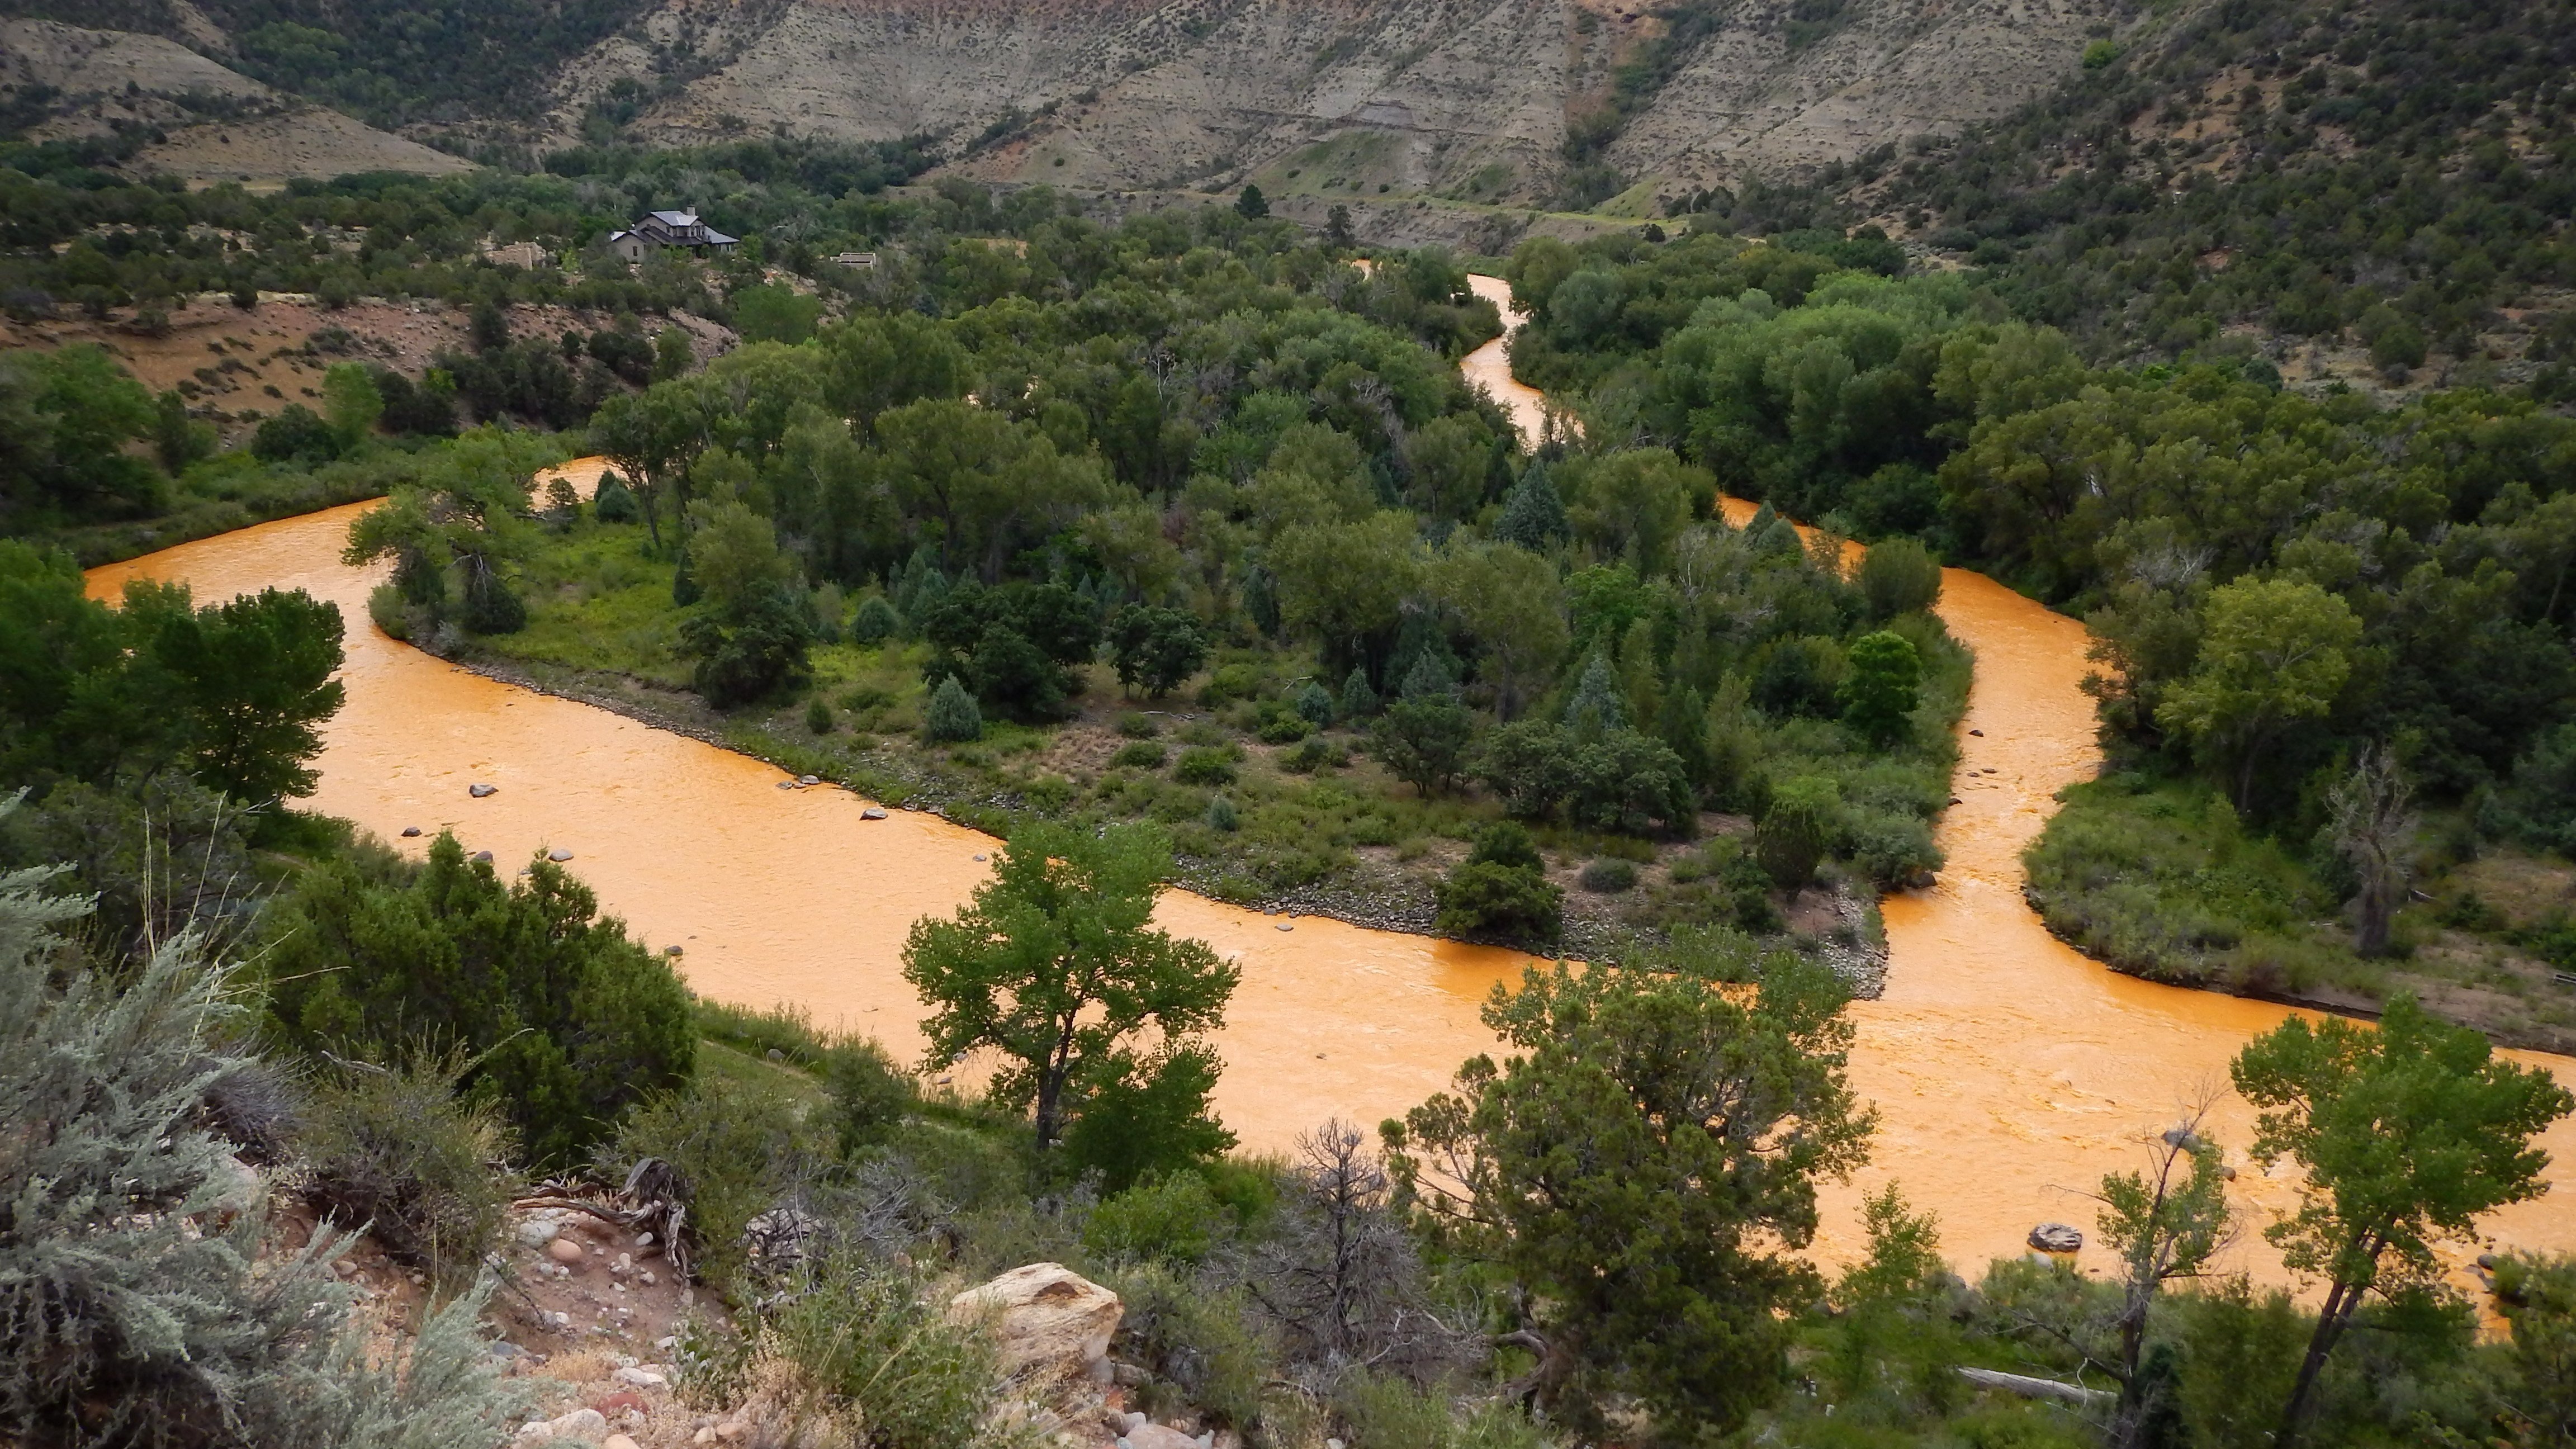 Three million gallons of heavy metal filled with wastewater spilled into the Animas River in southern Colorado beginning August 5, 2015, according to the U.S. Geological Survey. Levels of lead in at least one water sample tested 12,000 times higher than normal. So far, the spill has affected three states: Colorado, New Mexico and Utah.